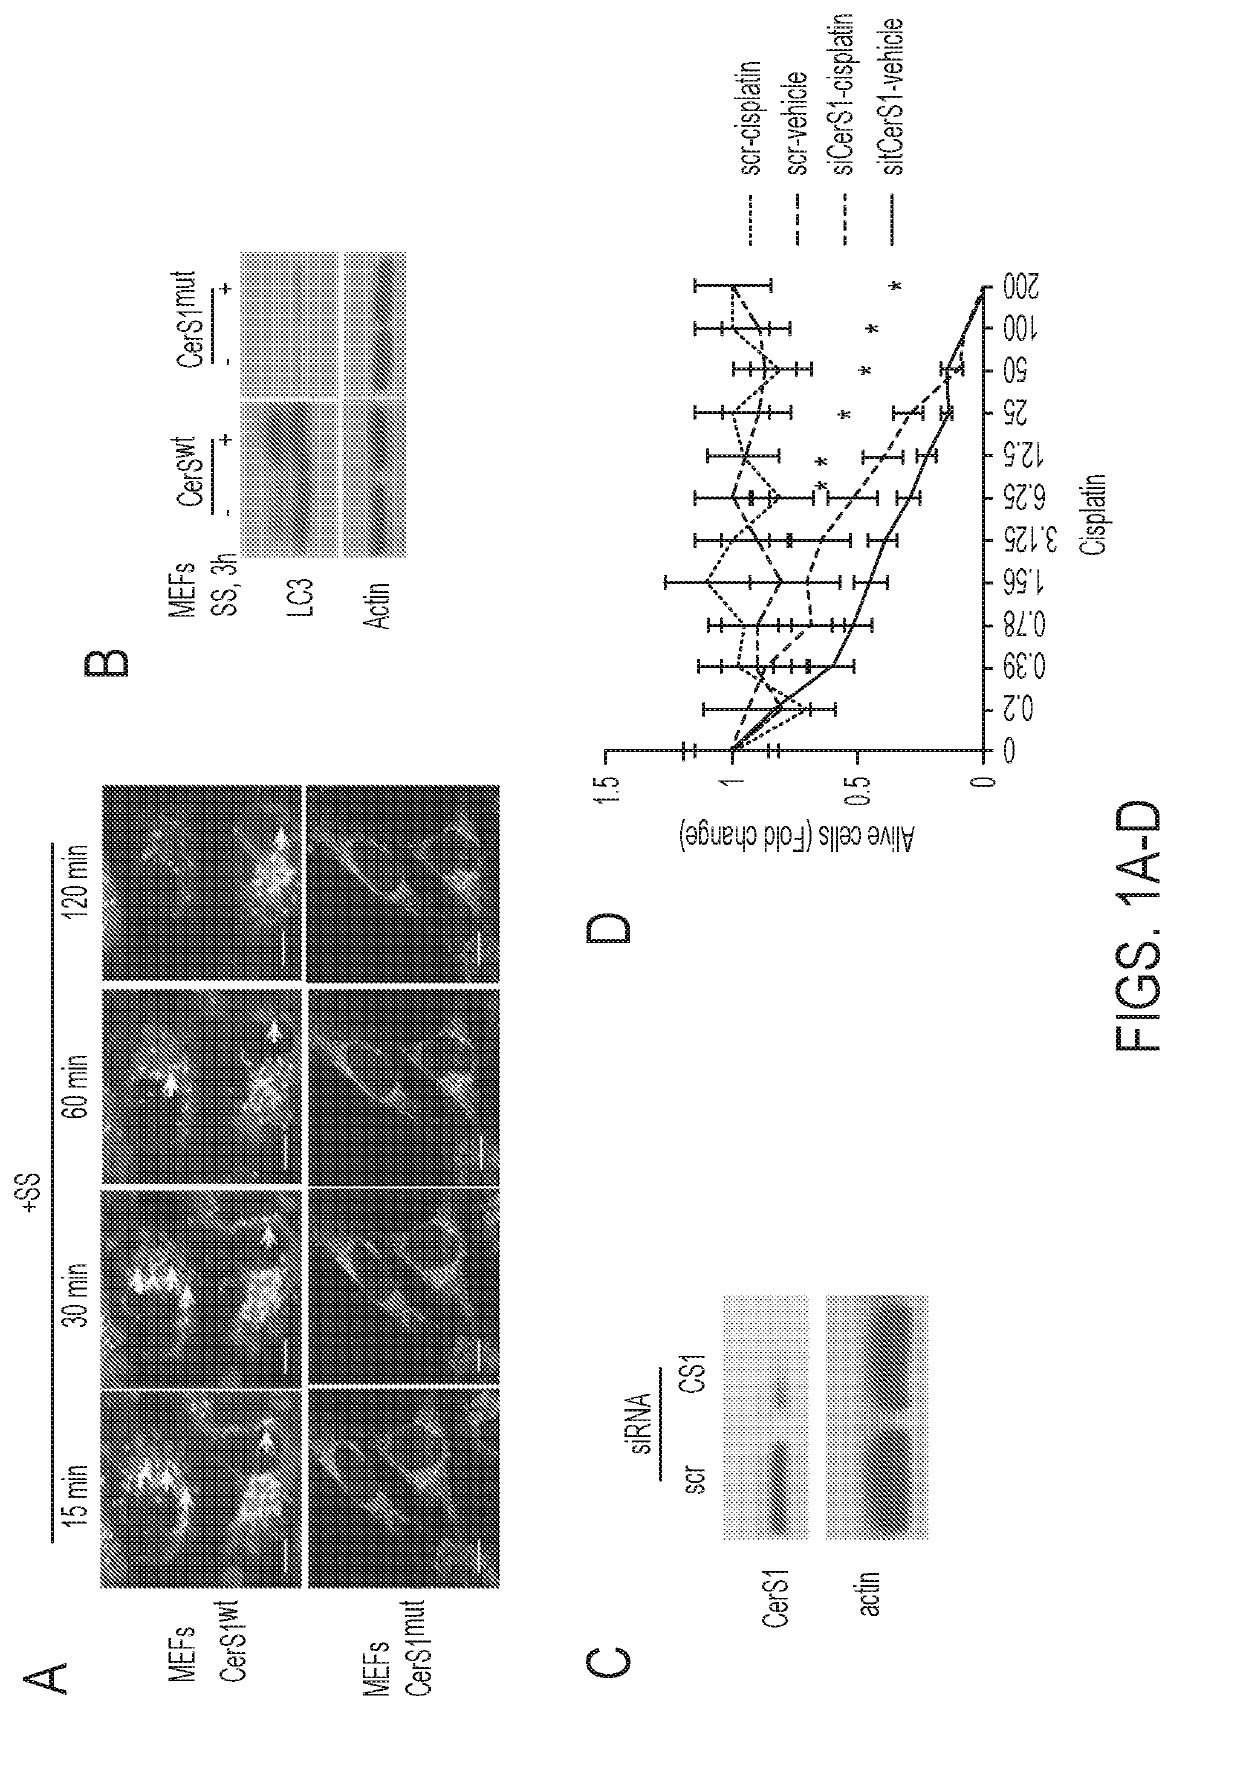 Polypeptides for improved response to Anti-cancer therapy